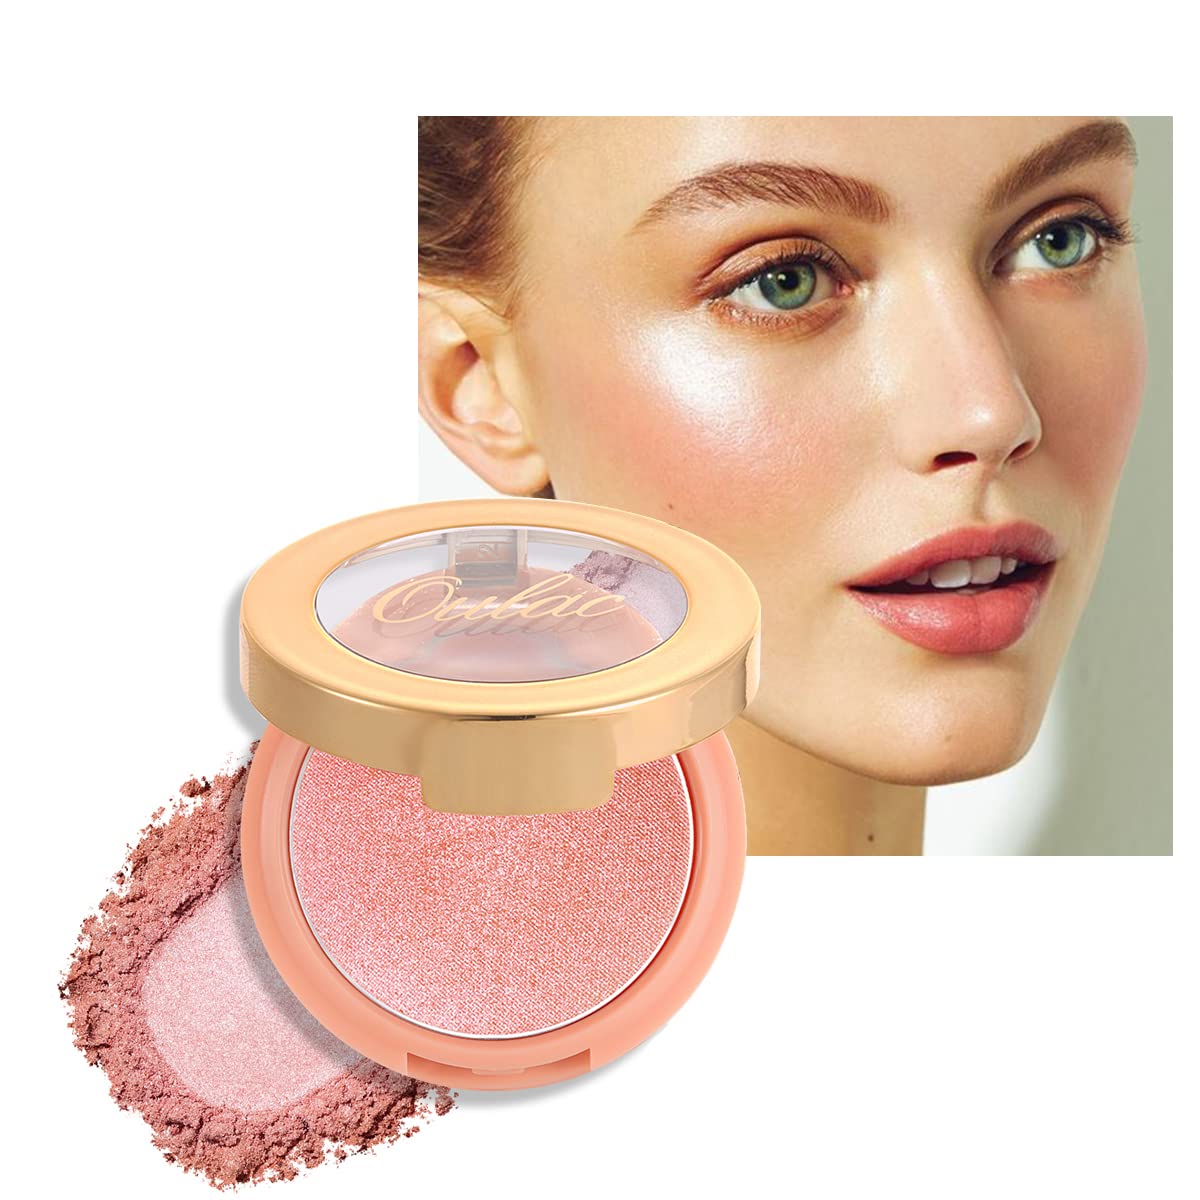 OULAC Lumious Blush Makeup| 2 in 1 Cream Blush & Highlighter| Shimmer Metallic Glow| Shape & Highlight Face| Cruelty-Free & Highlight Bling| Pink Blush 4.8g